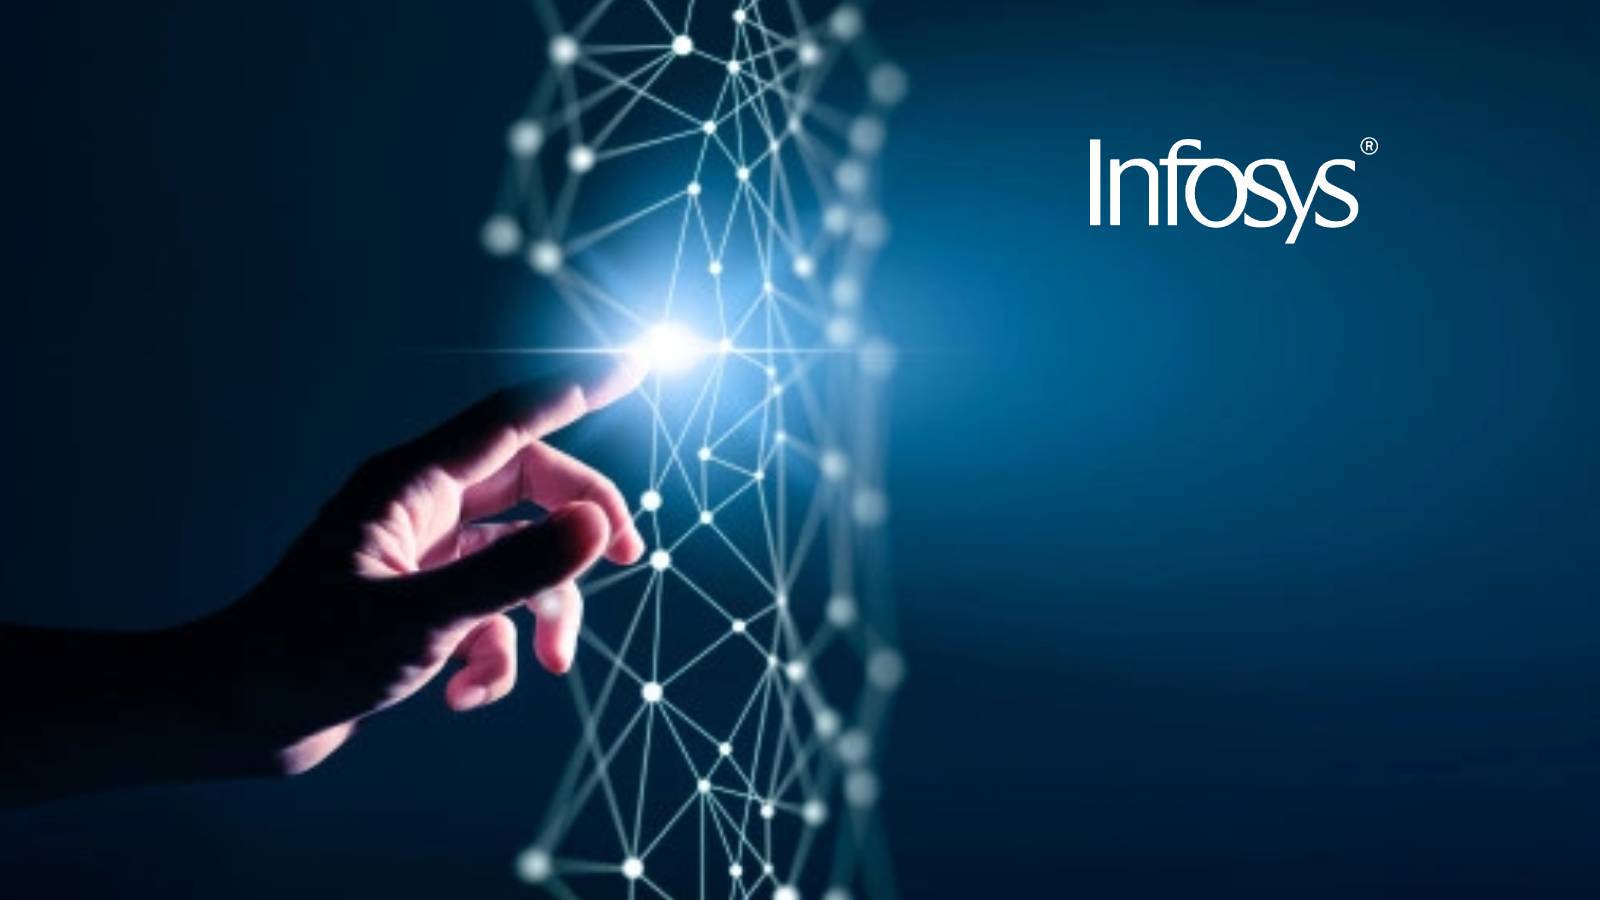 Essential Utilities Partners with Infosys to Drive Digital Transformation